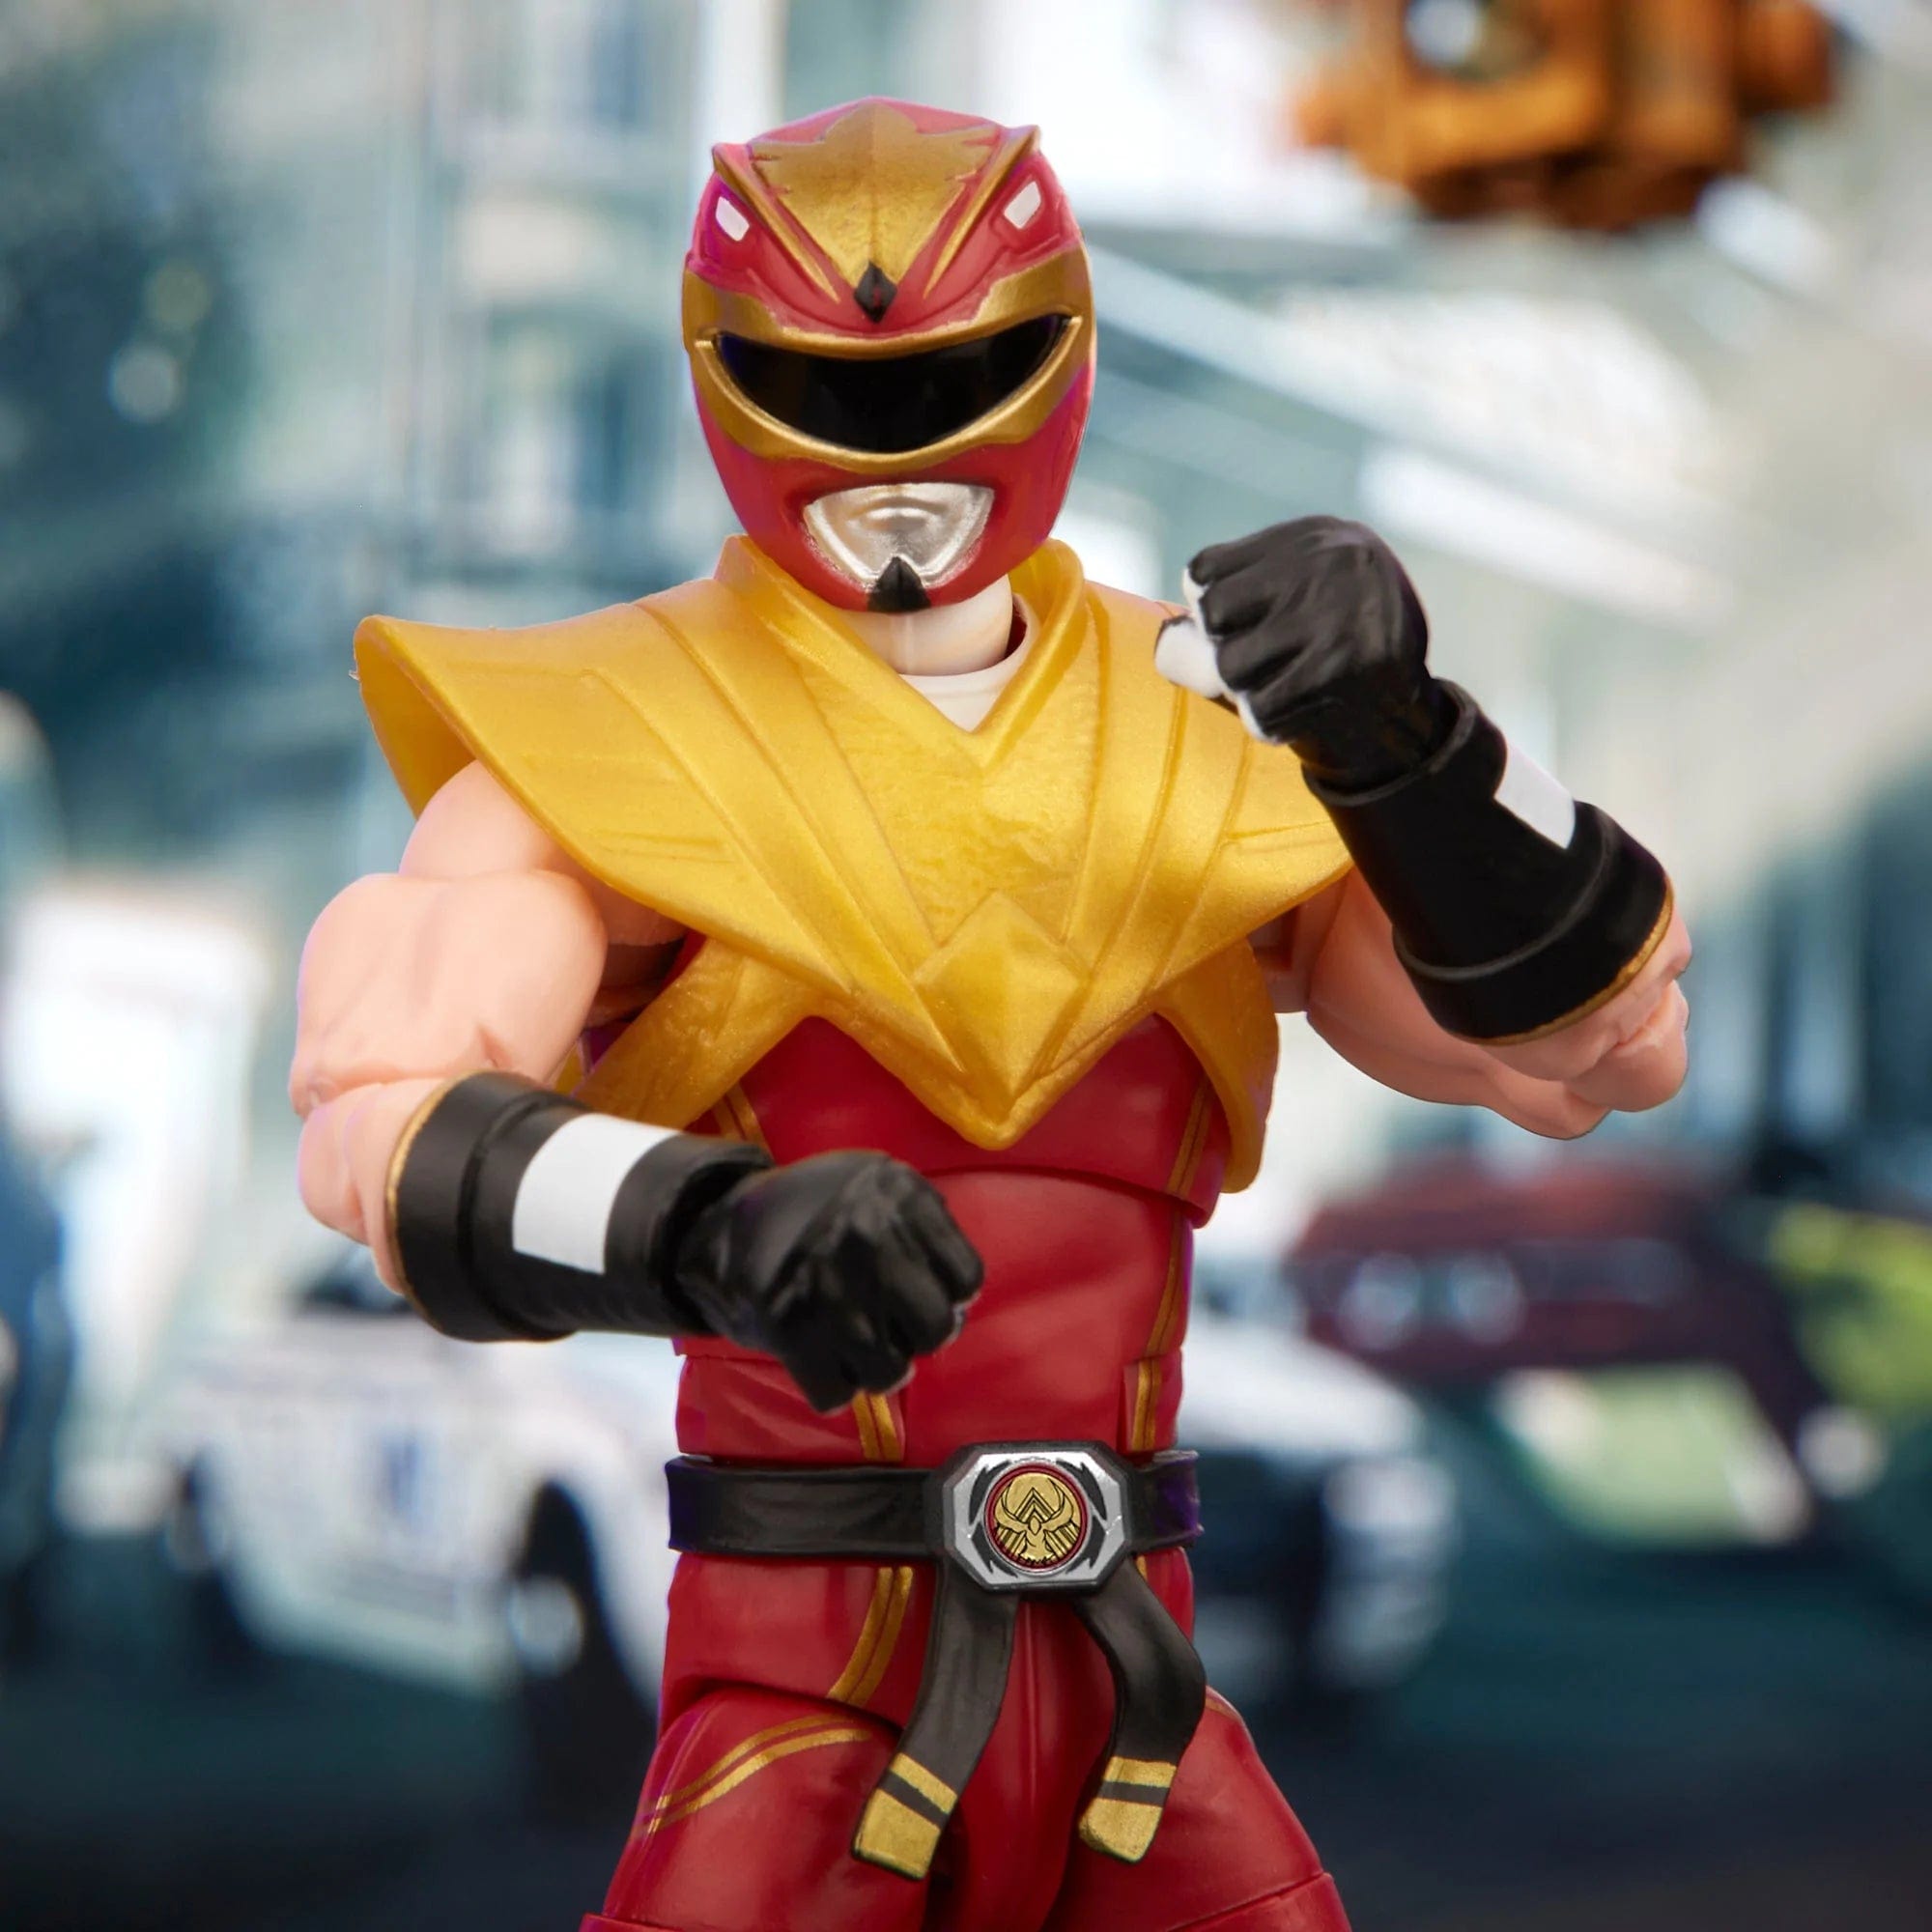 Power Rangers X Street Fighter Lightning Collection Morphed Ken Soaring Falcon Media Pose